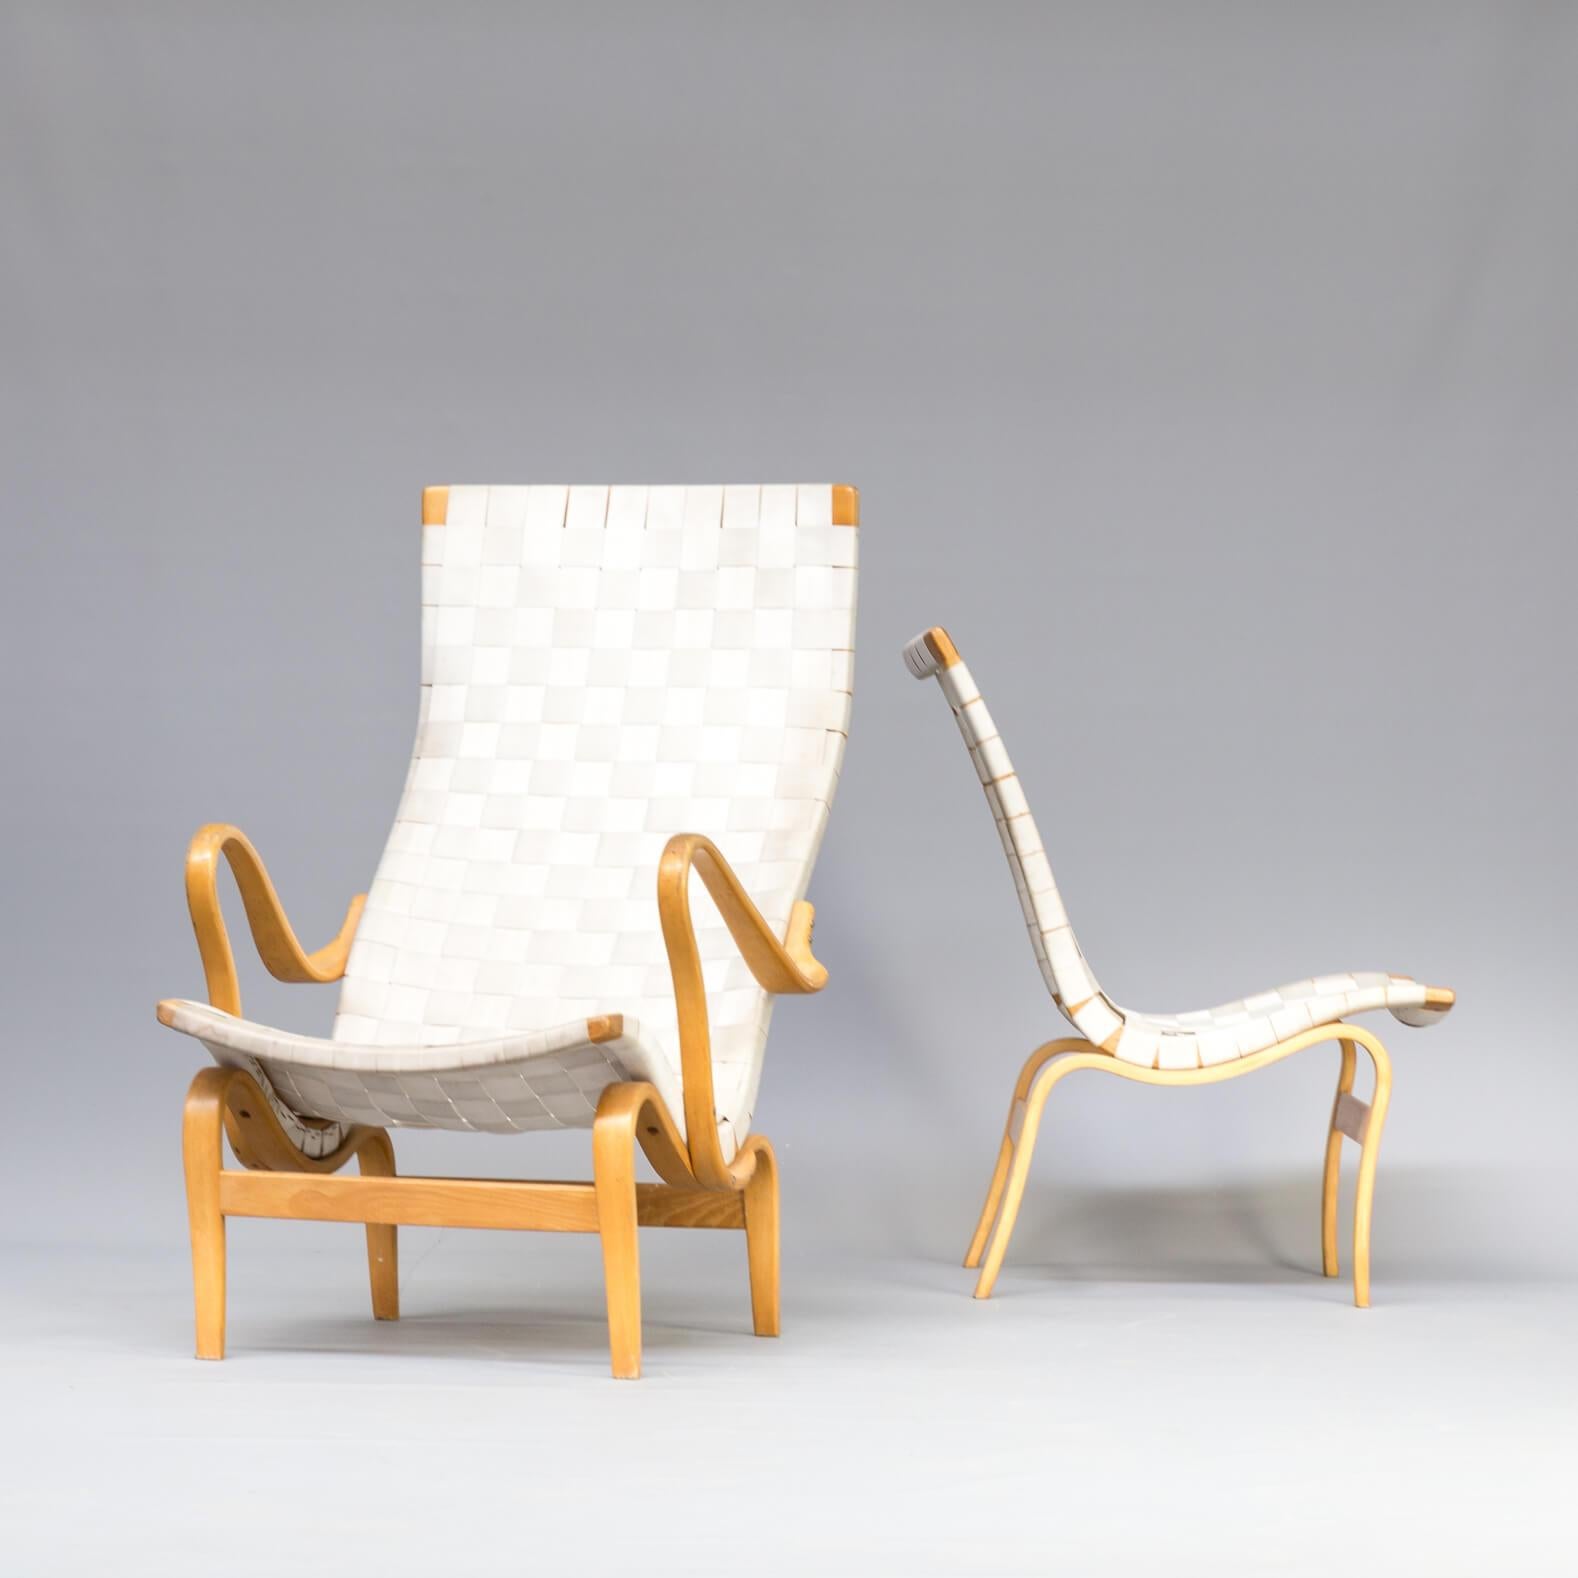 One set of two Bruno Mathsson ‘pernilla’ chairs for Karl Mathsson. Bruno Mathsson was born in 1907 in Värnamo, Sweden. His father, Karl, was a fourth-generation master cabinetmaker, so Bruno was exposed early on to the possibilities of new wood